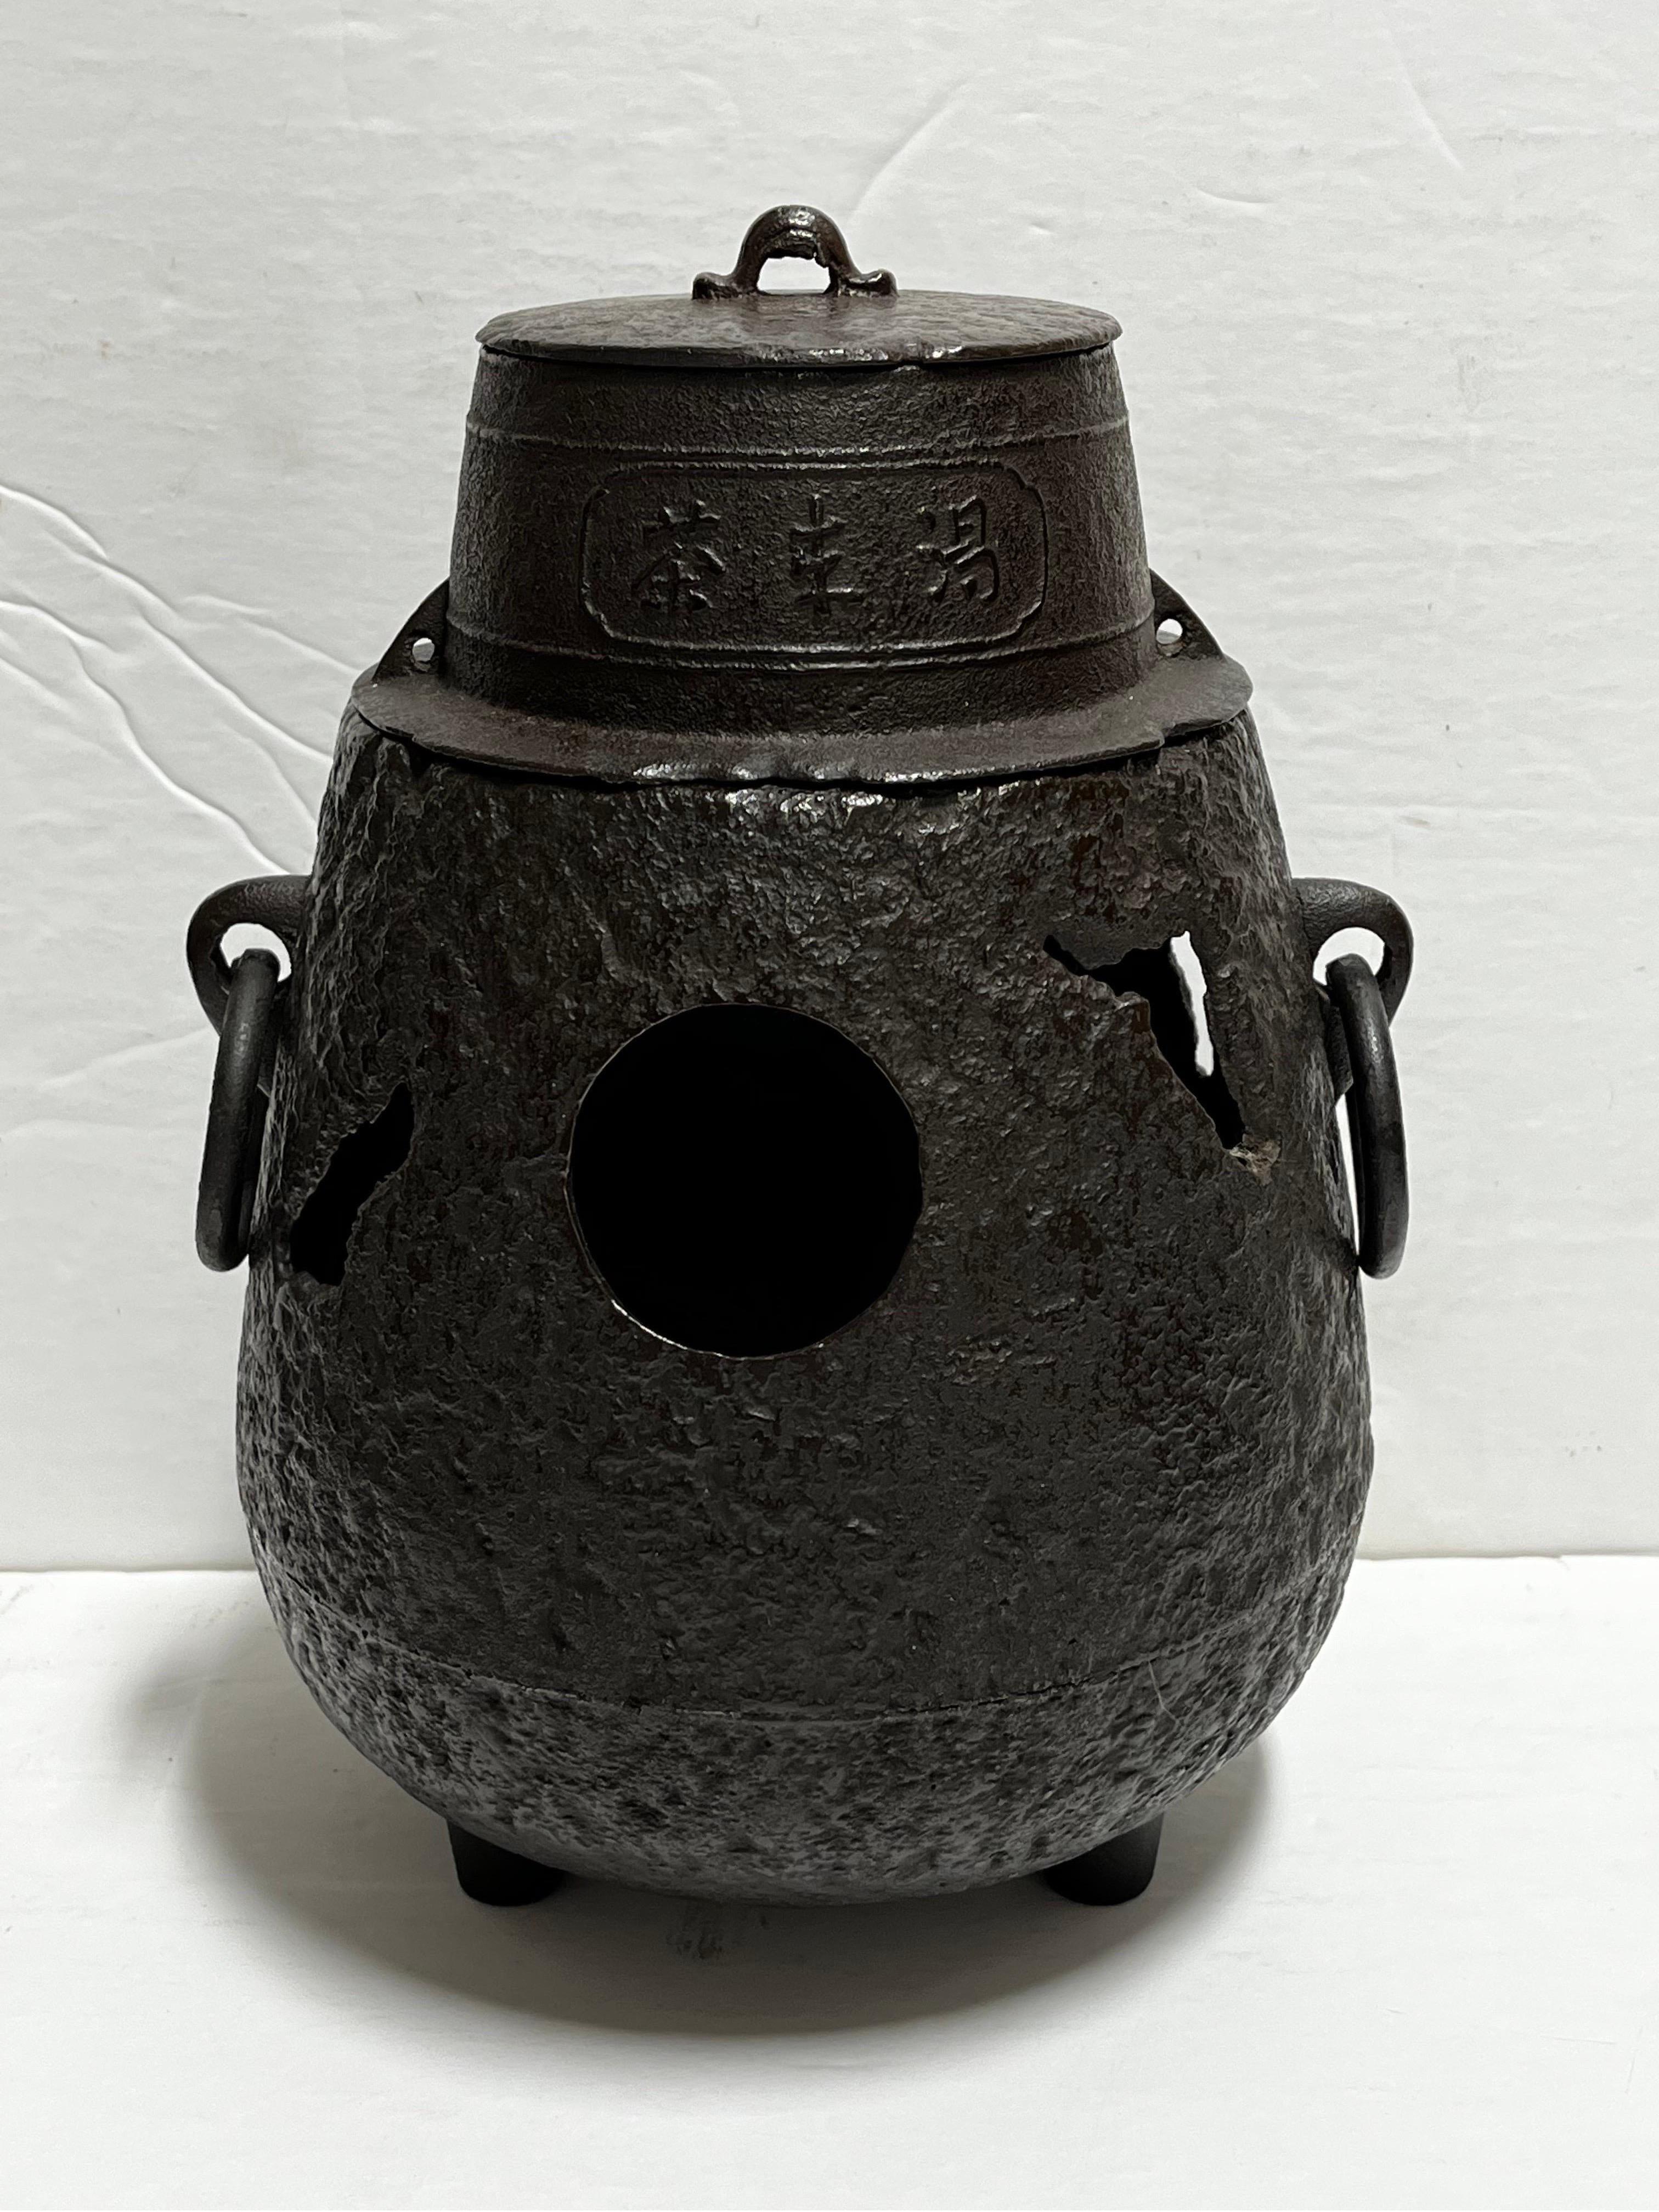 An antique Asian, probably Japanese in origin, cast iron hibachi brazier or Chagama Furo Kama. Dates to circa 1920’s. This type of object was used to heat the water for the tea ceremony. A bit about this item from wikipedia, 